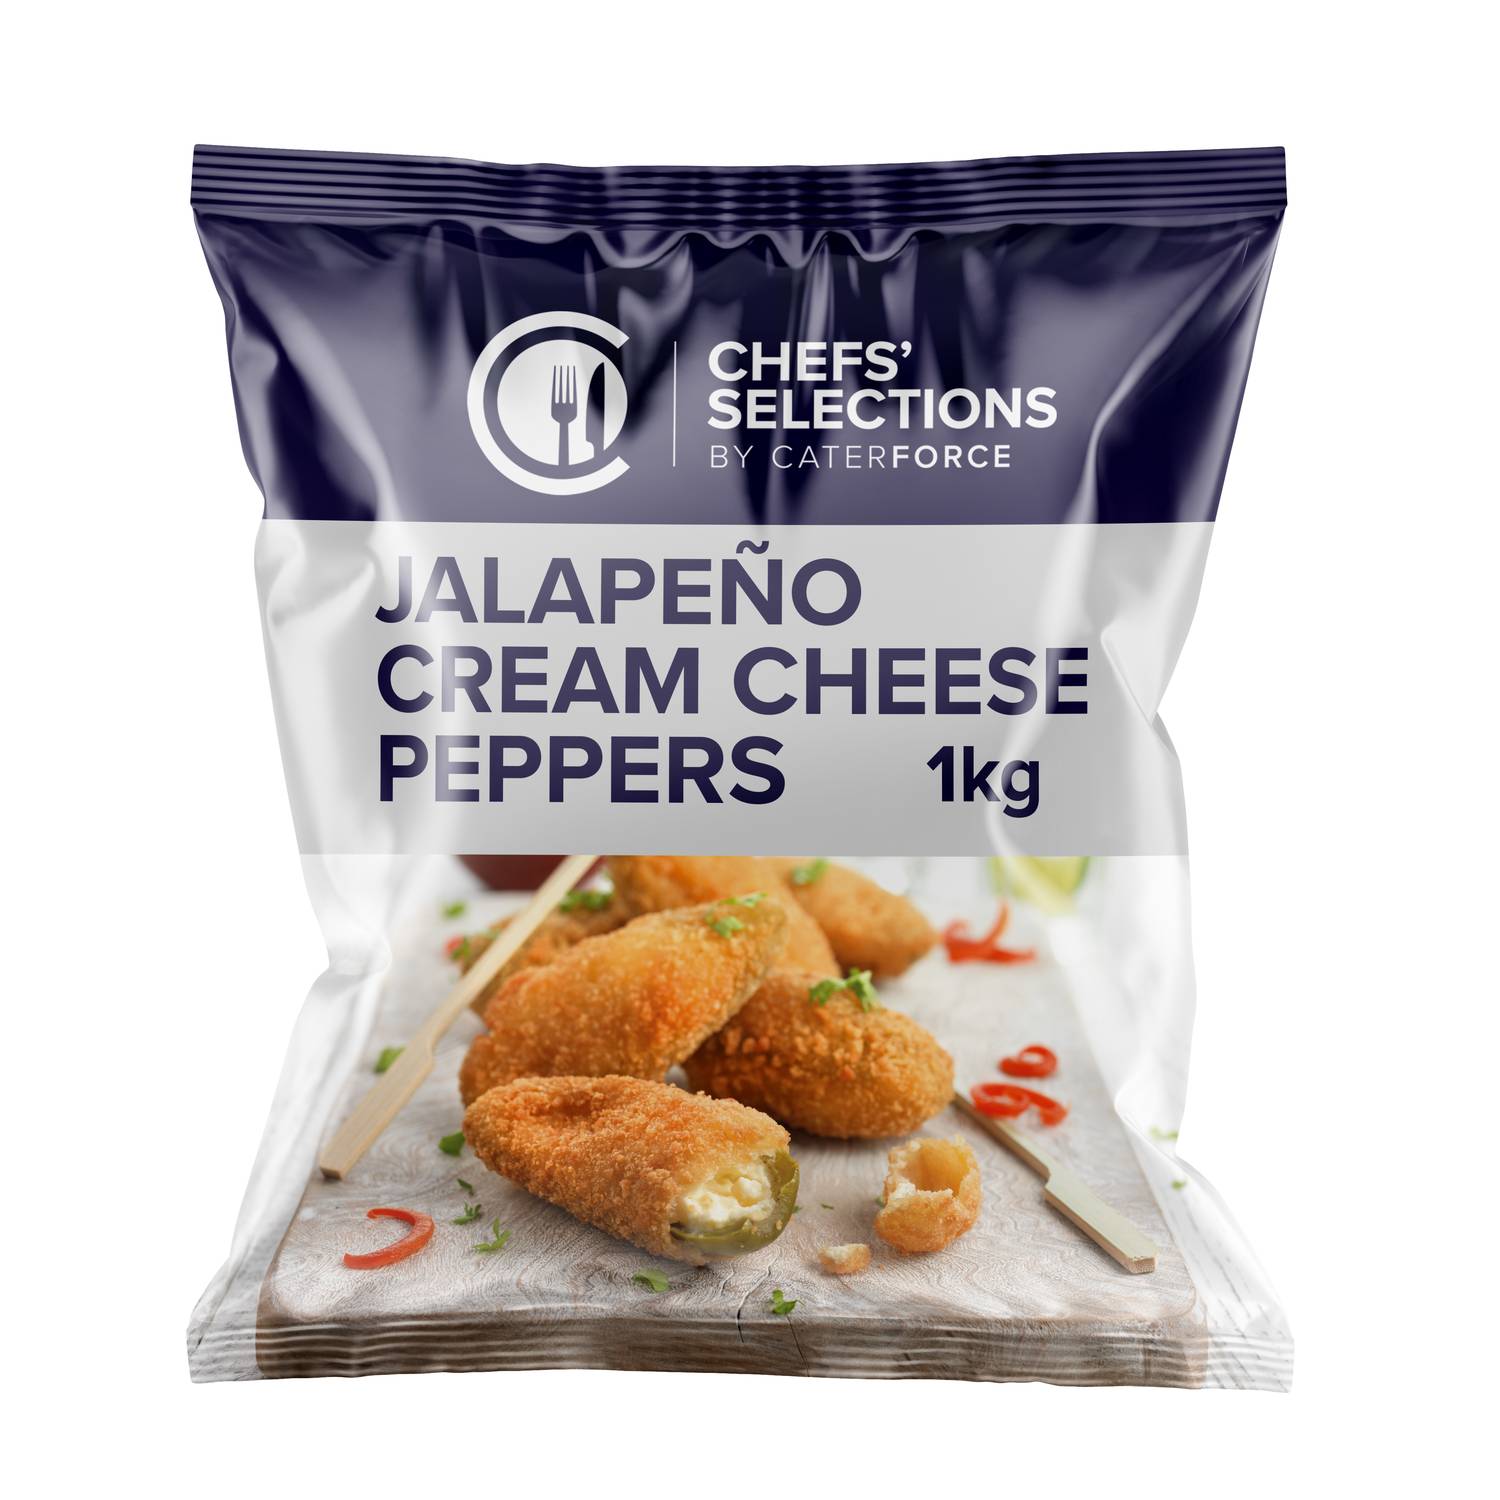 Chefs’ Selections Jalapeno Cream Cheese Peppers (6 x 1kg)